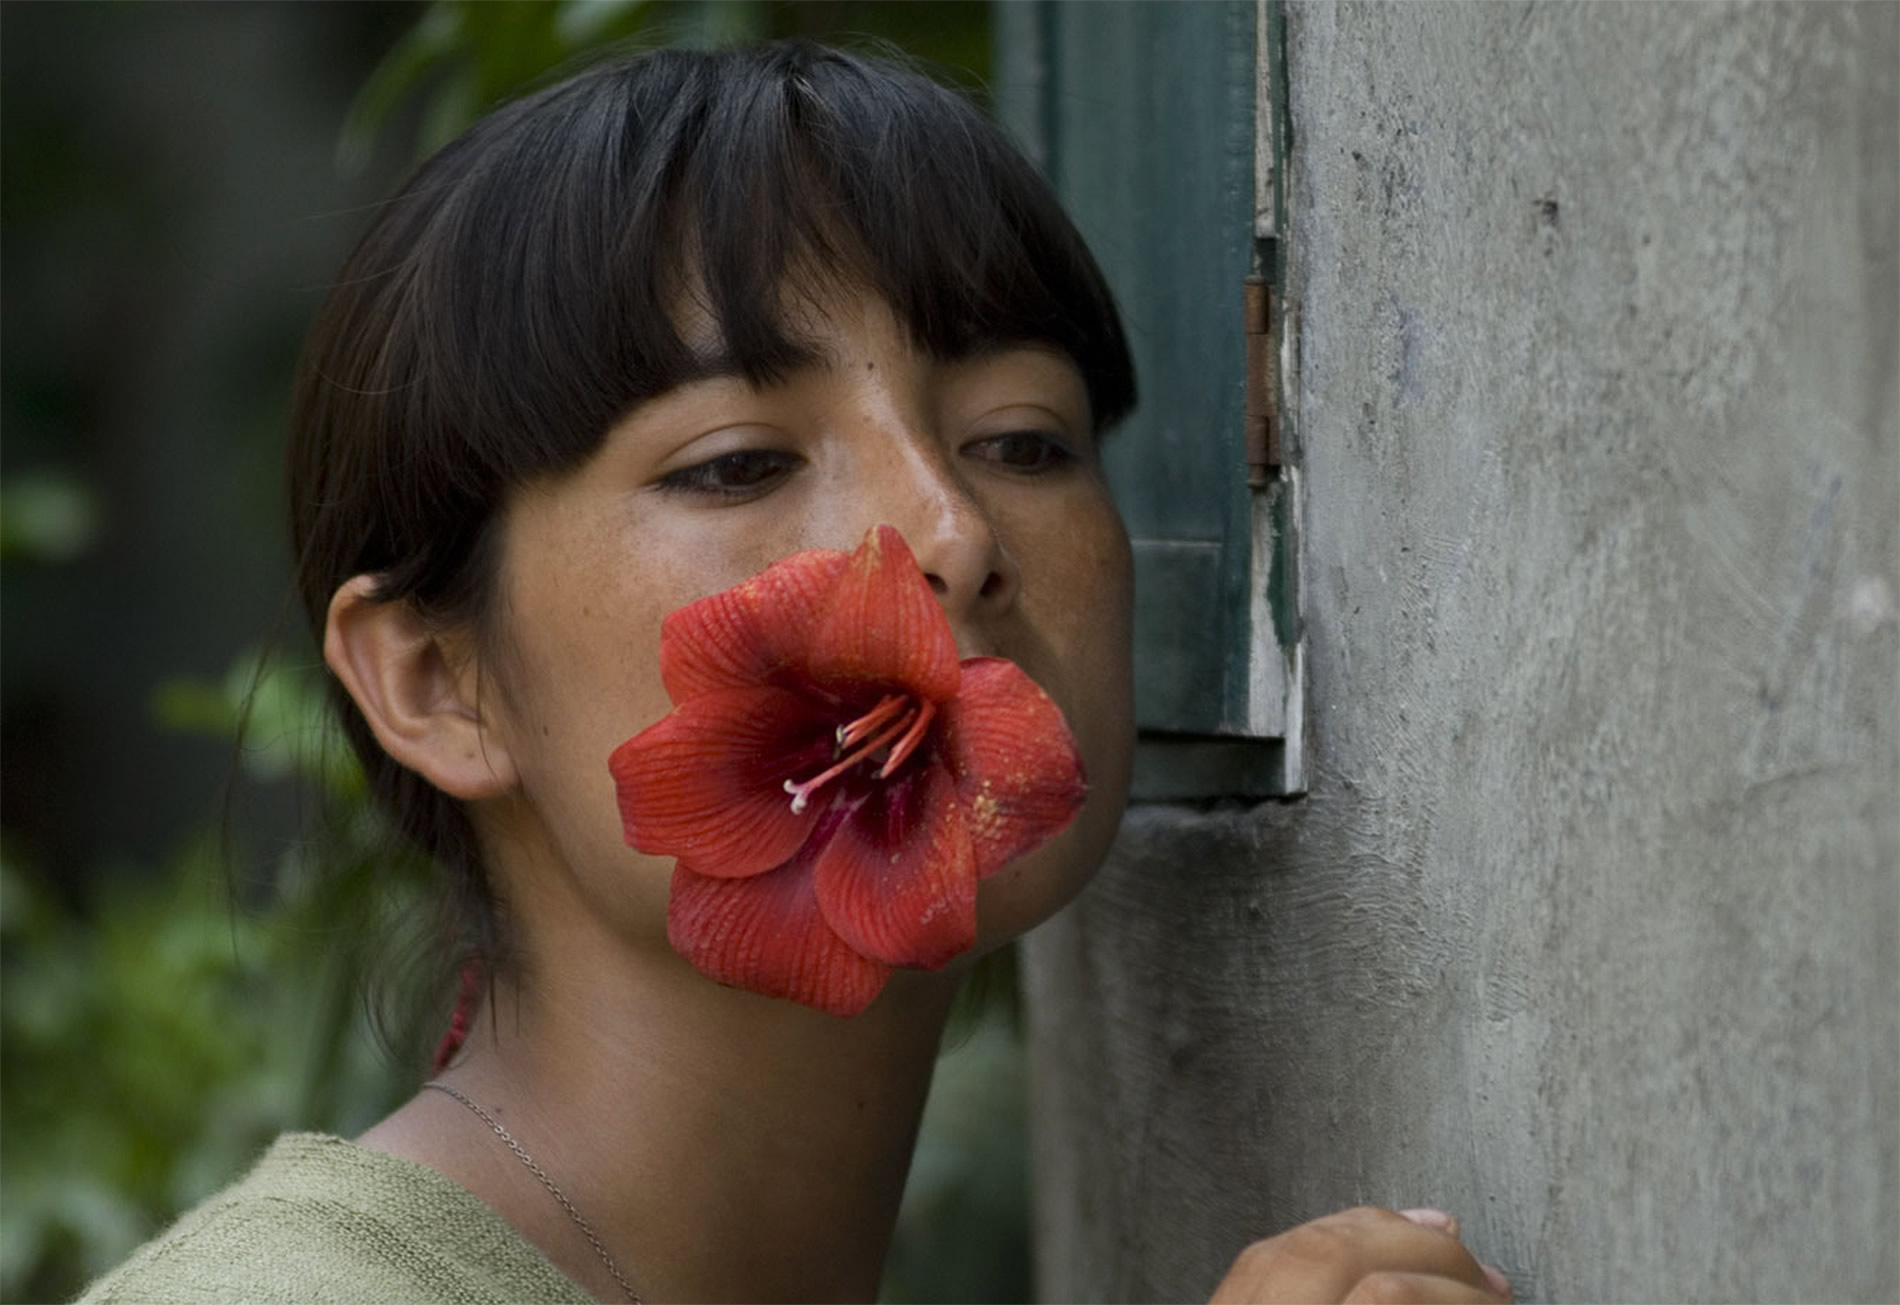 mexican actress with red flower in her mouth, “The Milk of Sorrow”